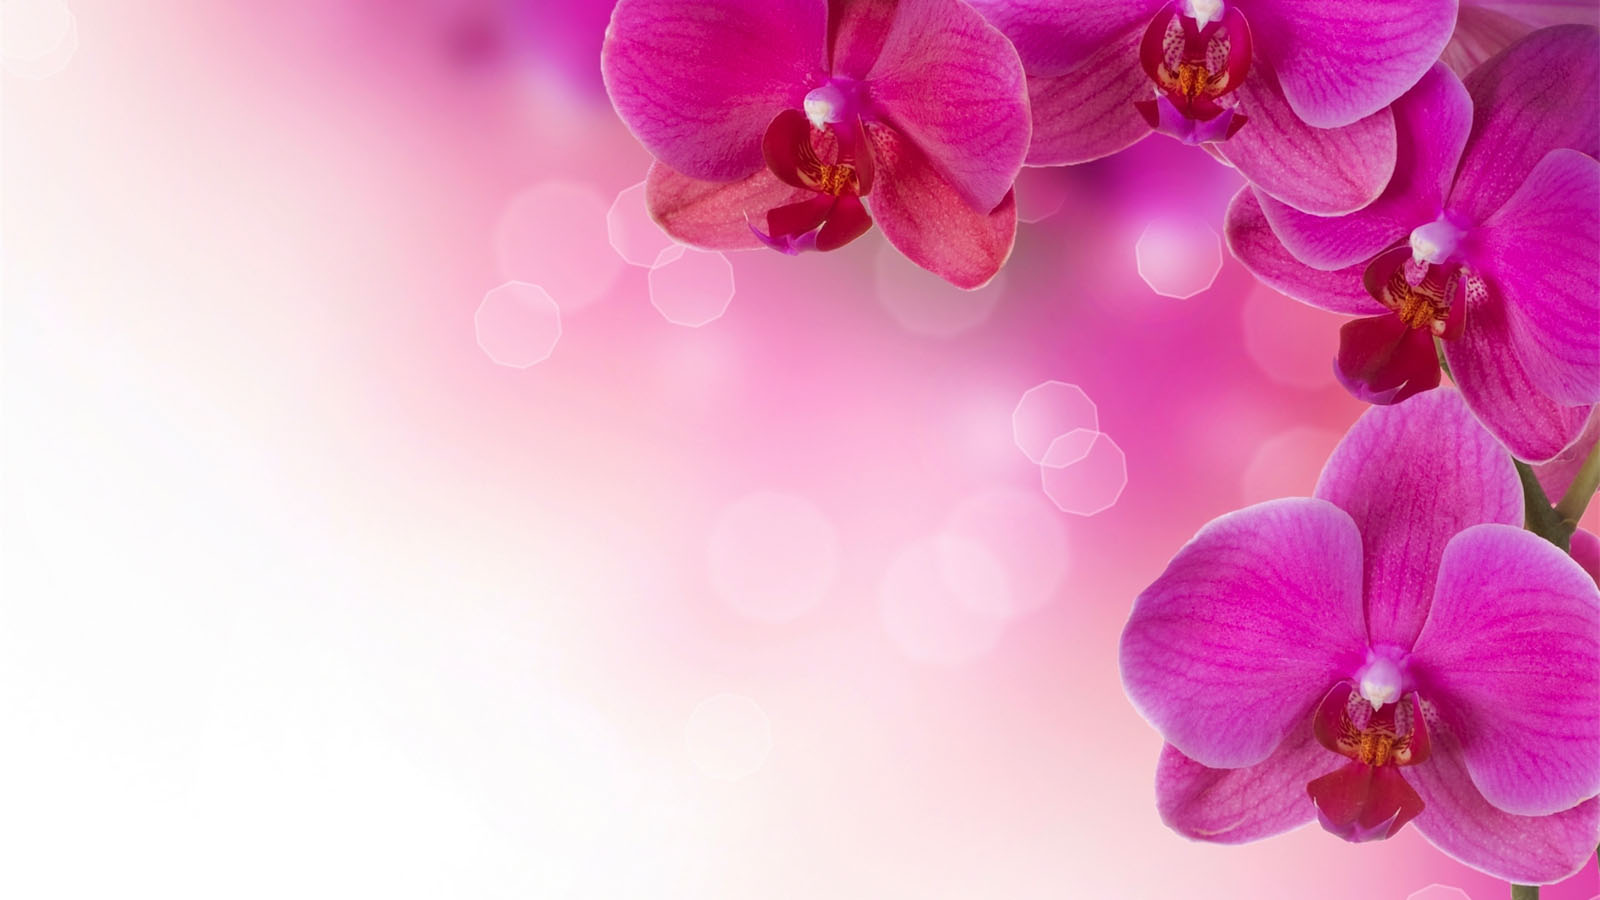 background images flowers pink #18